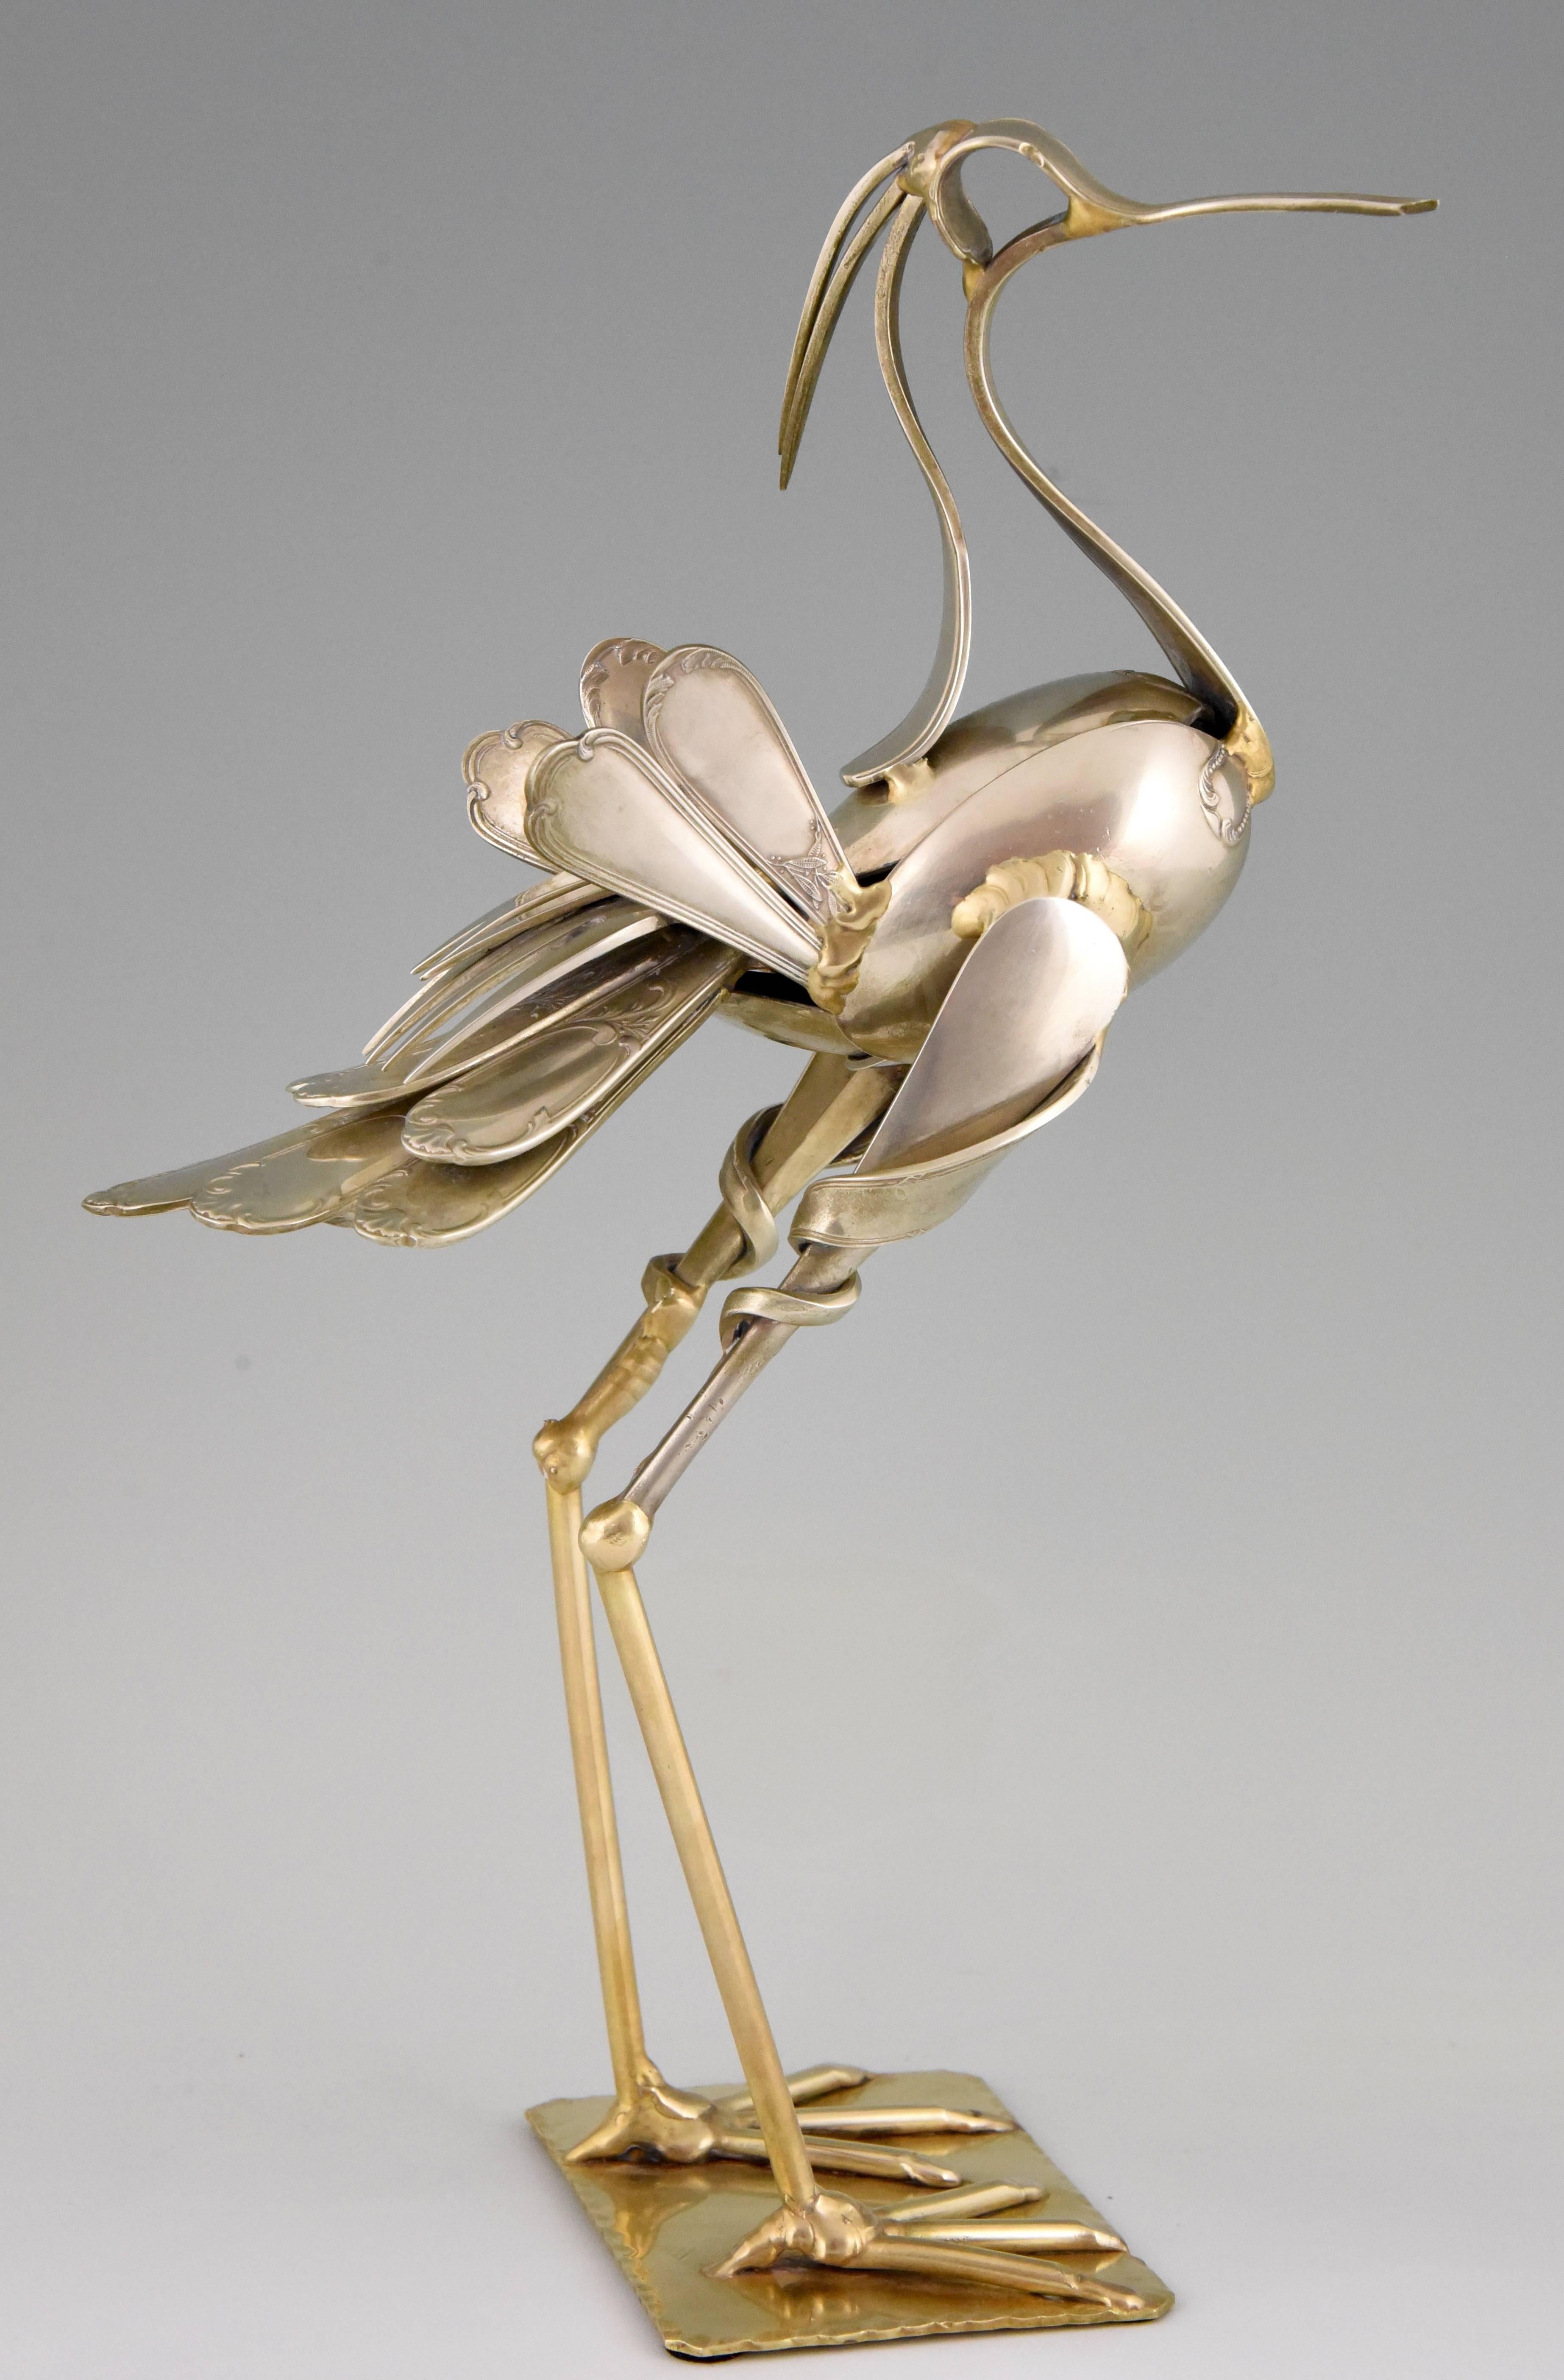 An original cutlery sculpture of a bird made of antique forks and spoons by the famous French artist Gérard Bouvier, signed and dated 1998. 

Artist/ Maker: Gerard Bouvier
Signature/ Marks: G. Bouvier, 98
Style: Modern.
Date: 1998
Material: